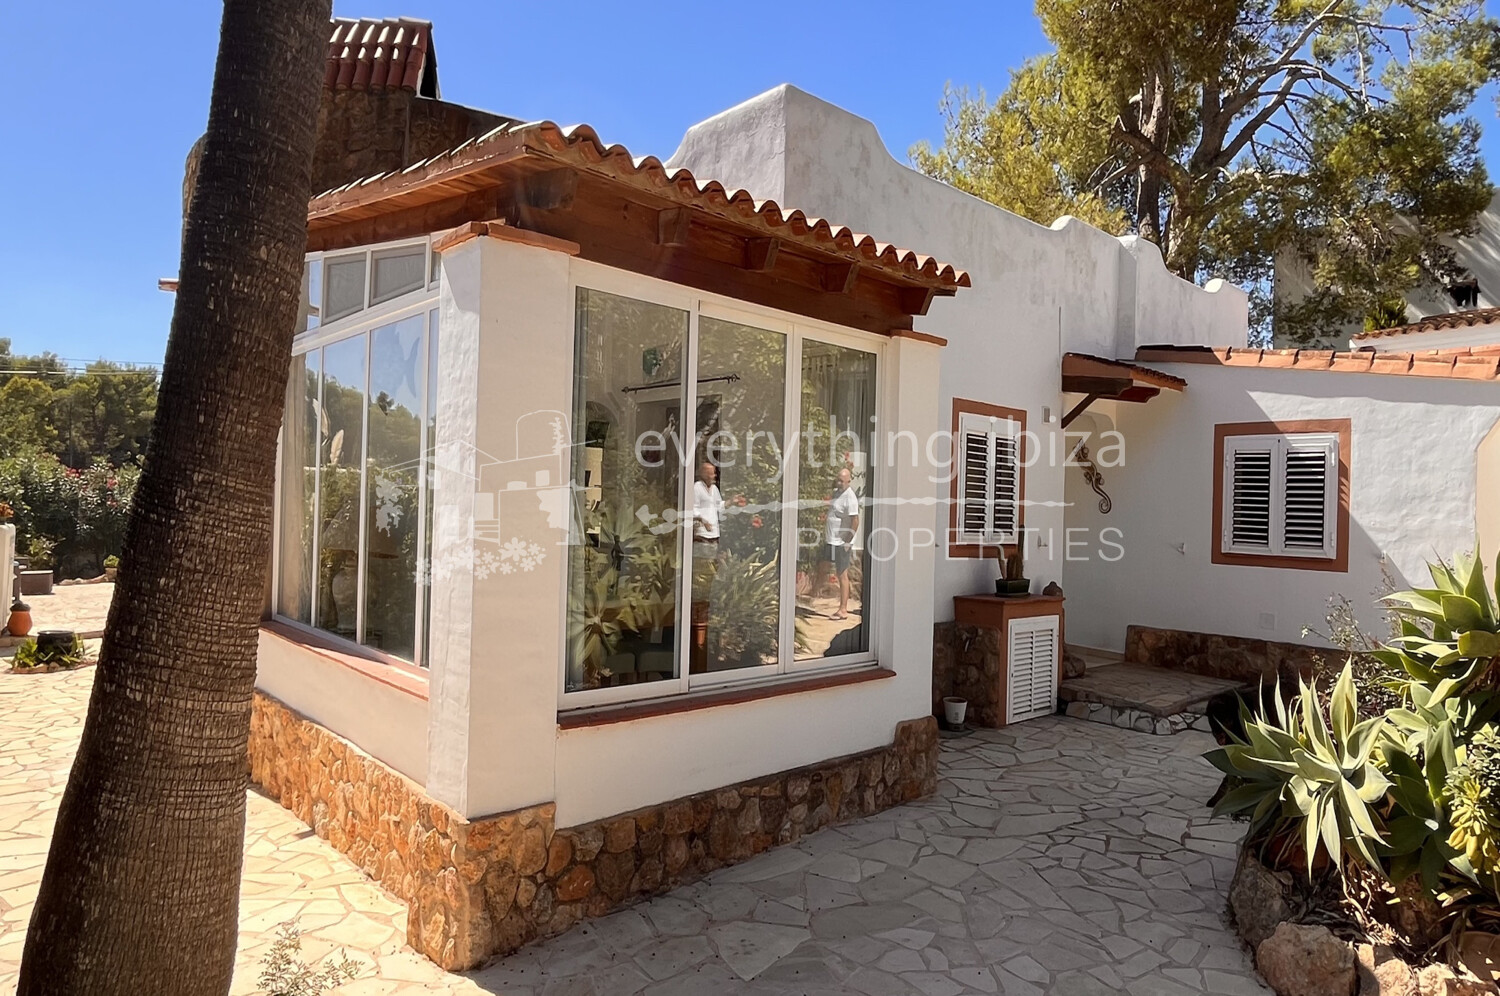 Villa in Scenic Location Close to Idyllic North Coast Beaches, ref. 1641, for sale in Ibiza by everything ibiza Properties